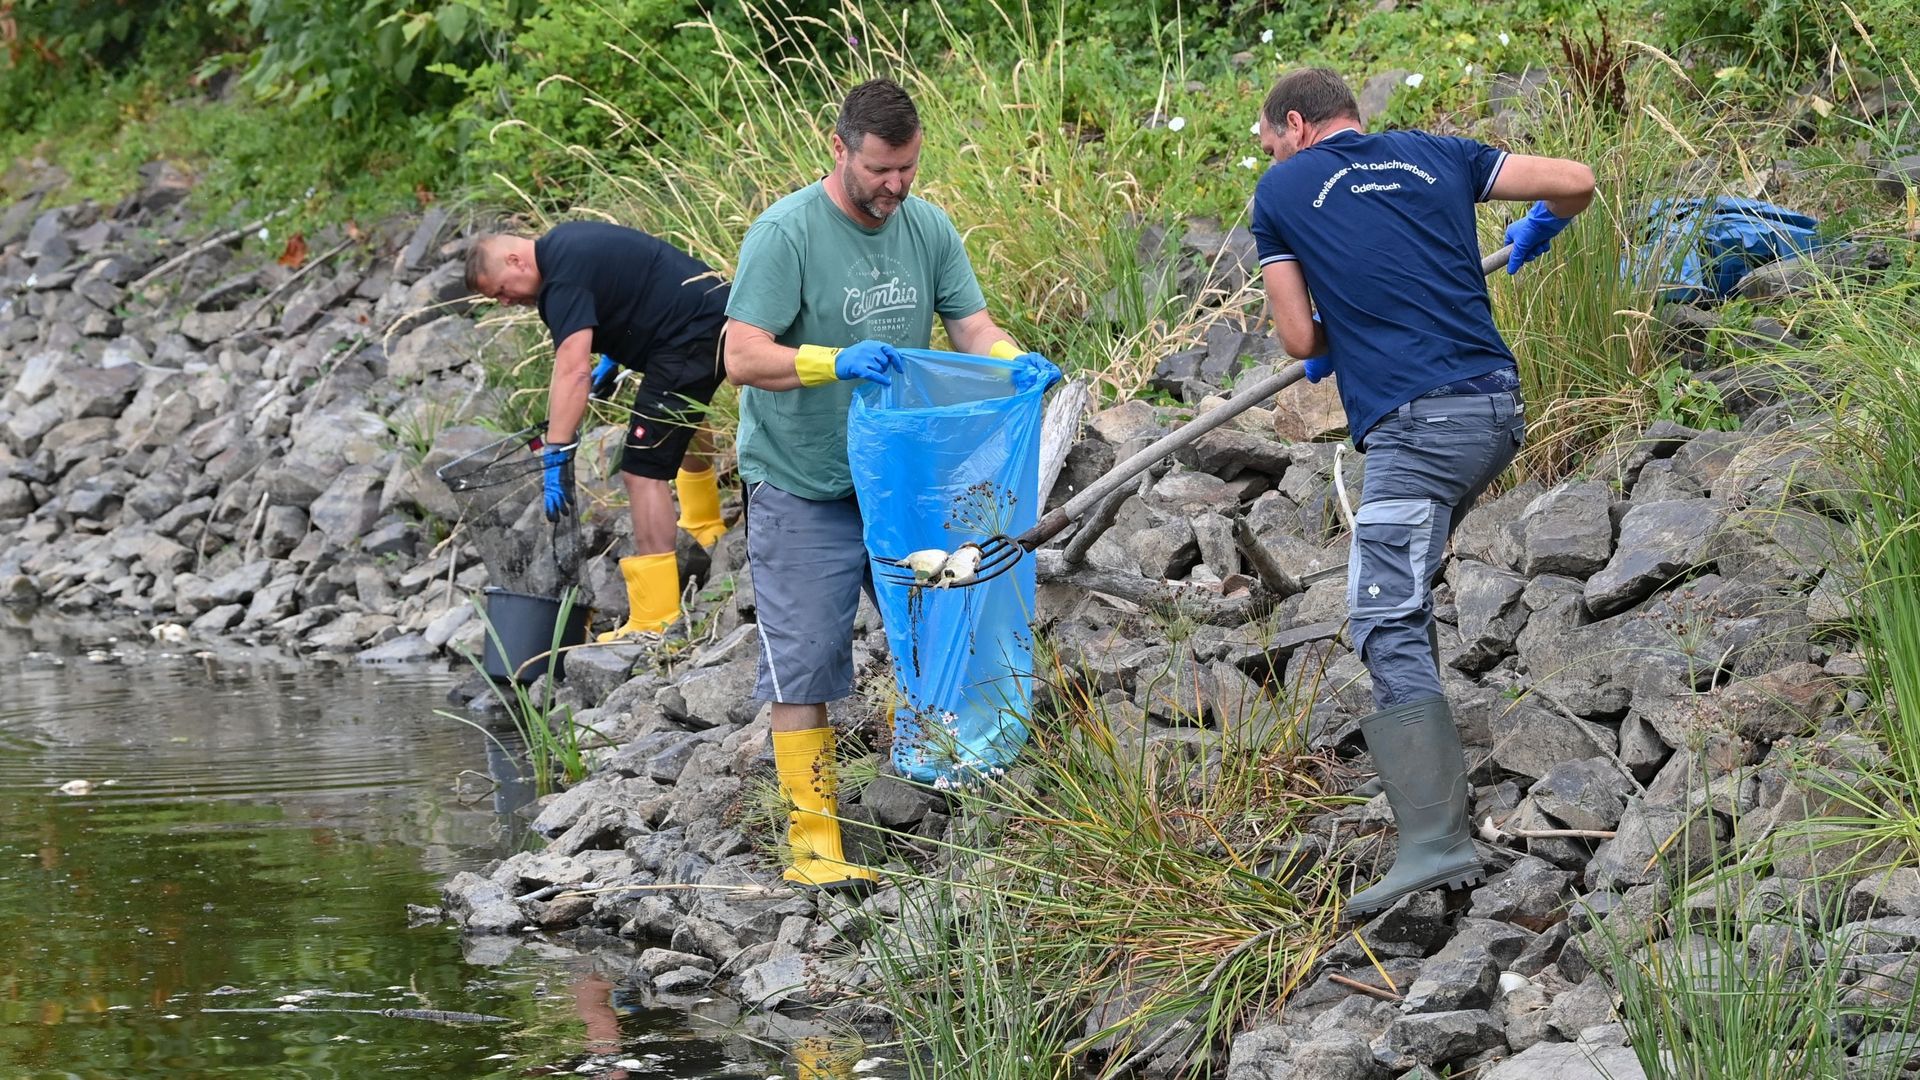 Hundreds of people collect thousands of dead fish in Germany